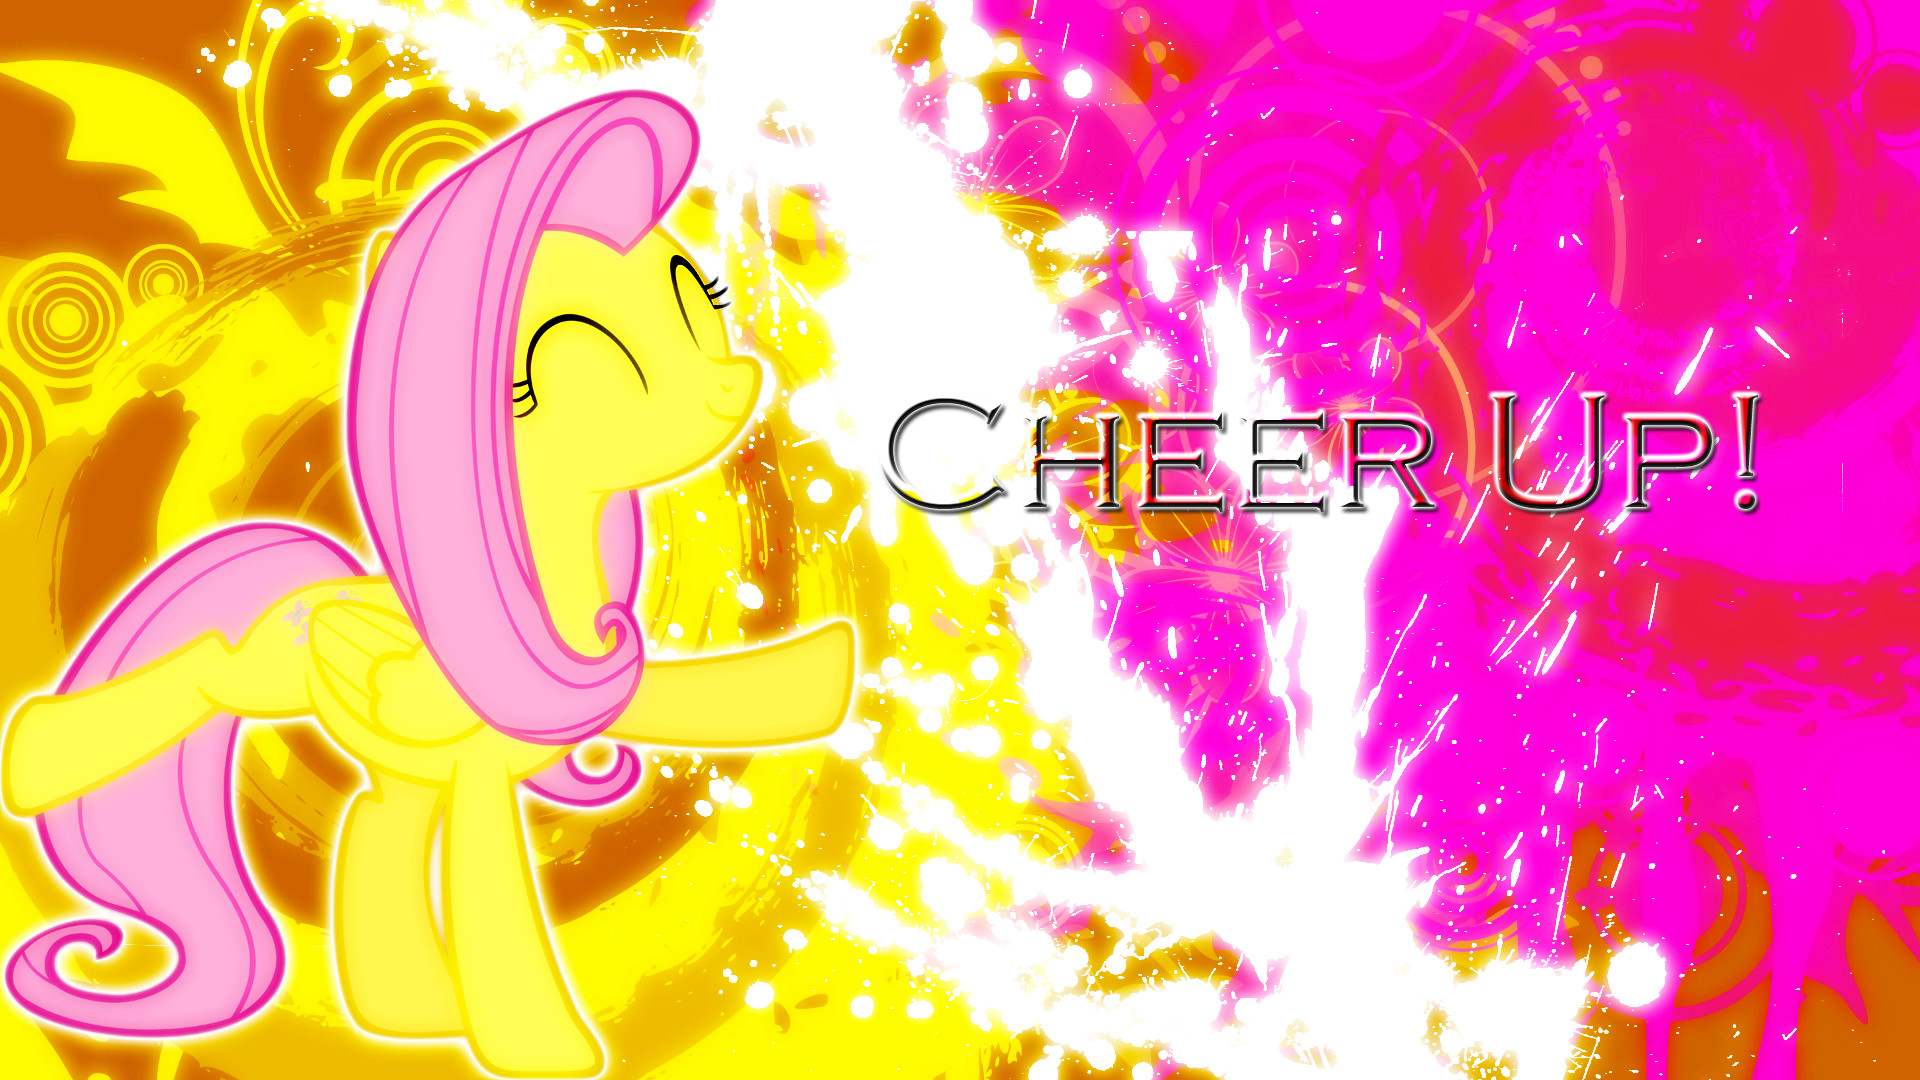 1920x1080 ... Cheer up Wallpaper for Brittney by EnemyD